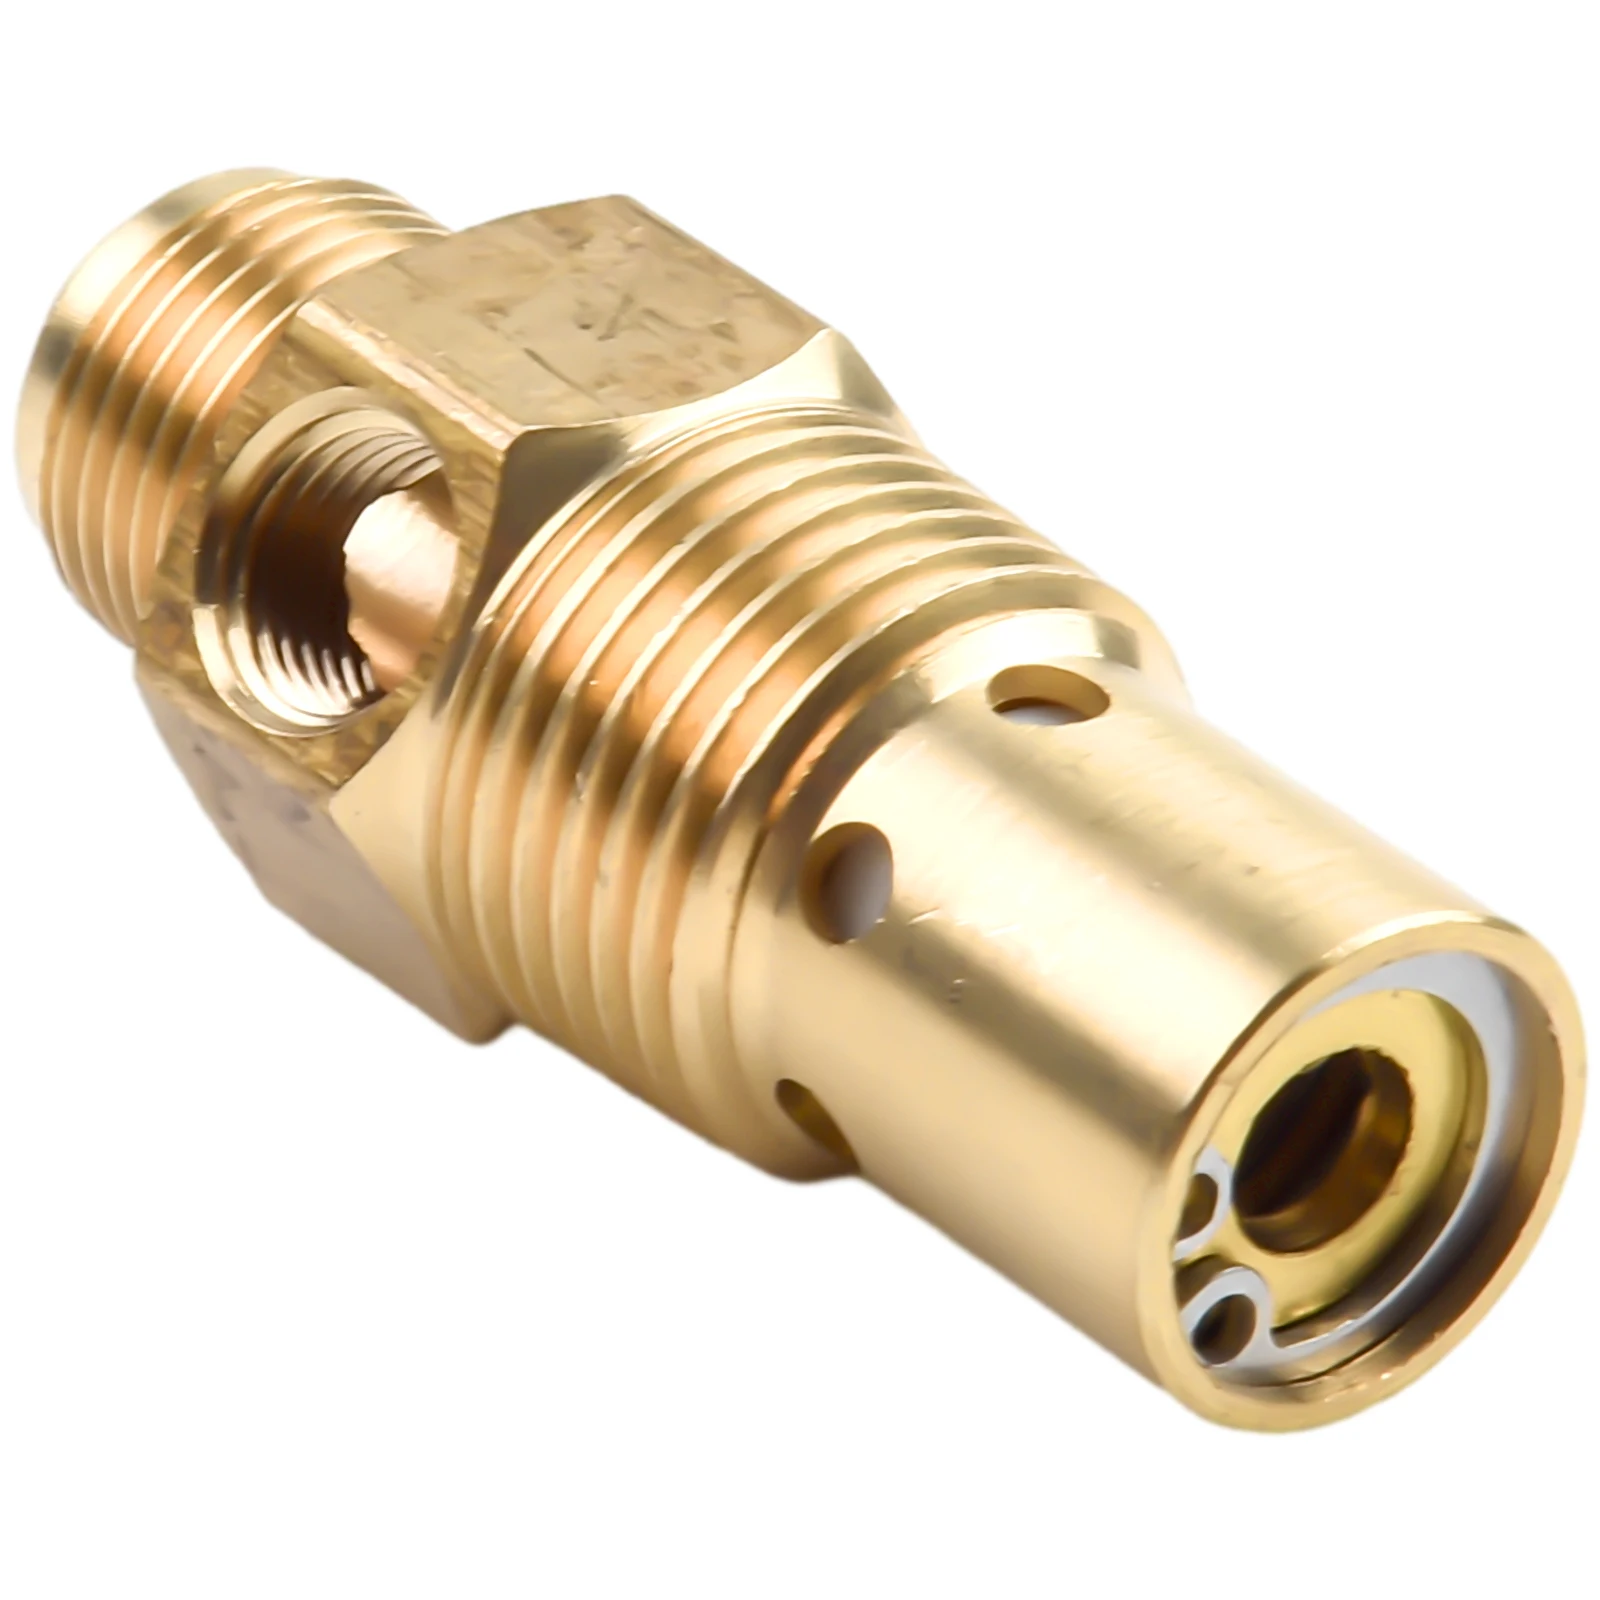 Brass Check Valve G3/8 Air Compressor Male Threaded NPT×1/2In For Air Compressor Replacement Radiator Check Valve durable connect valve connector 1pc 8mm check m10 1 male pcp filling joint quick stainless steel copper home